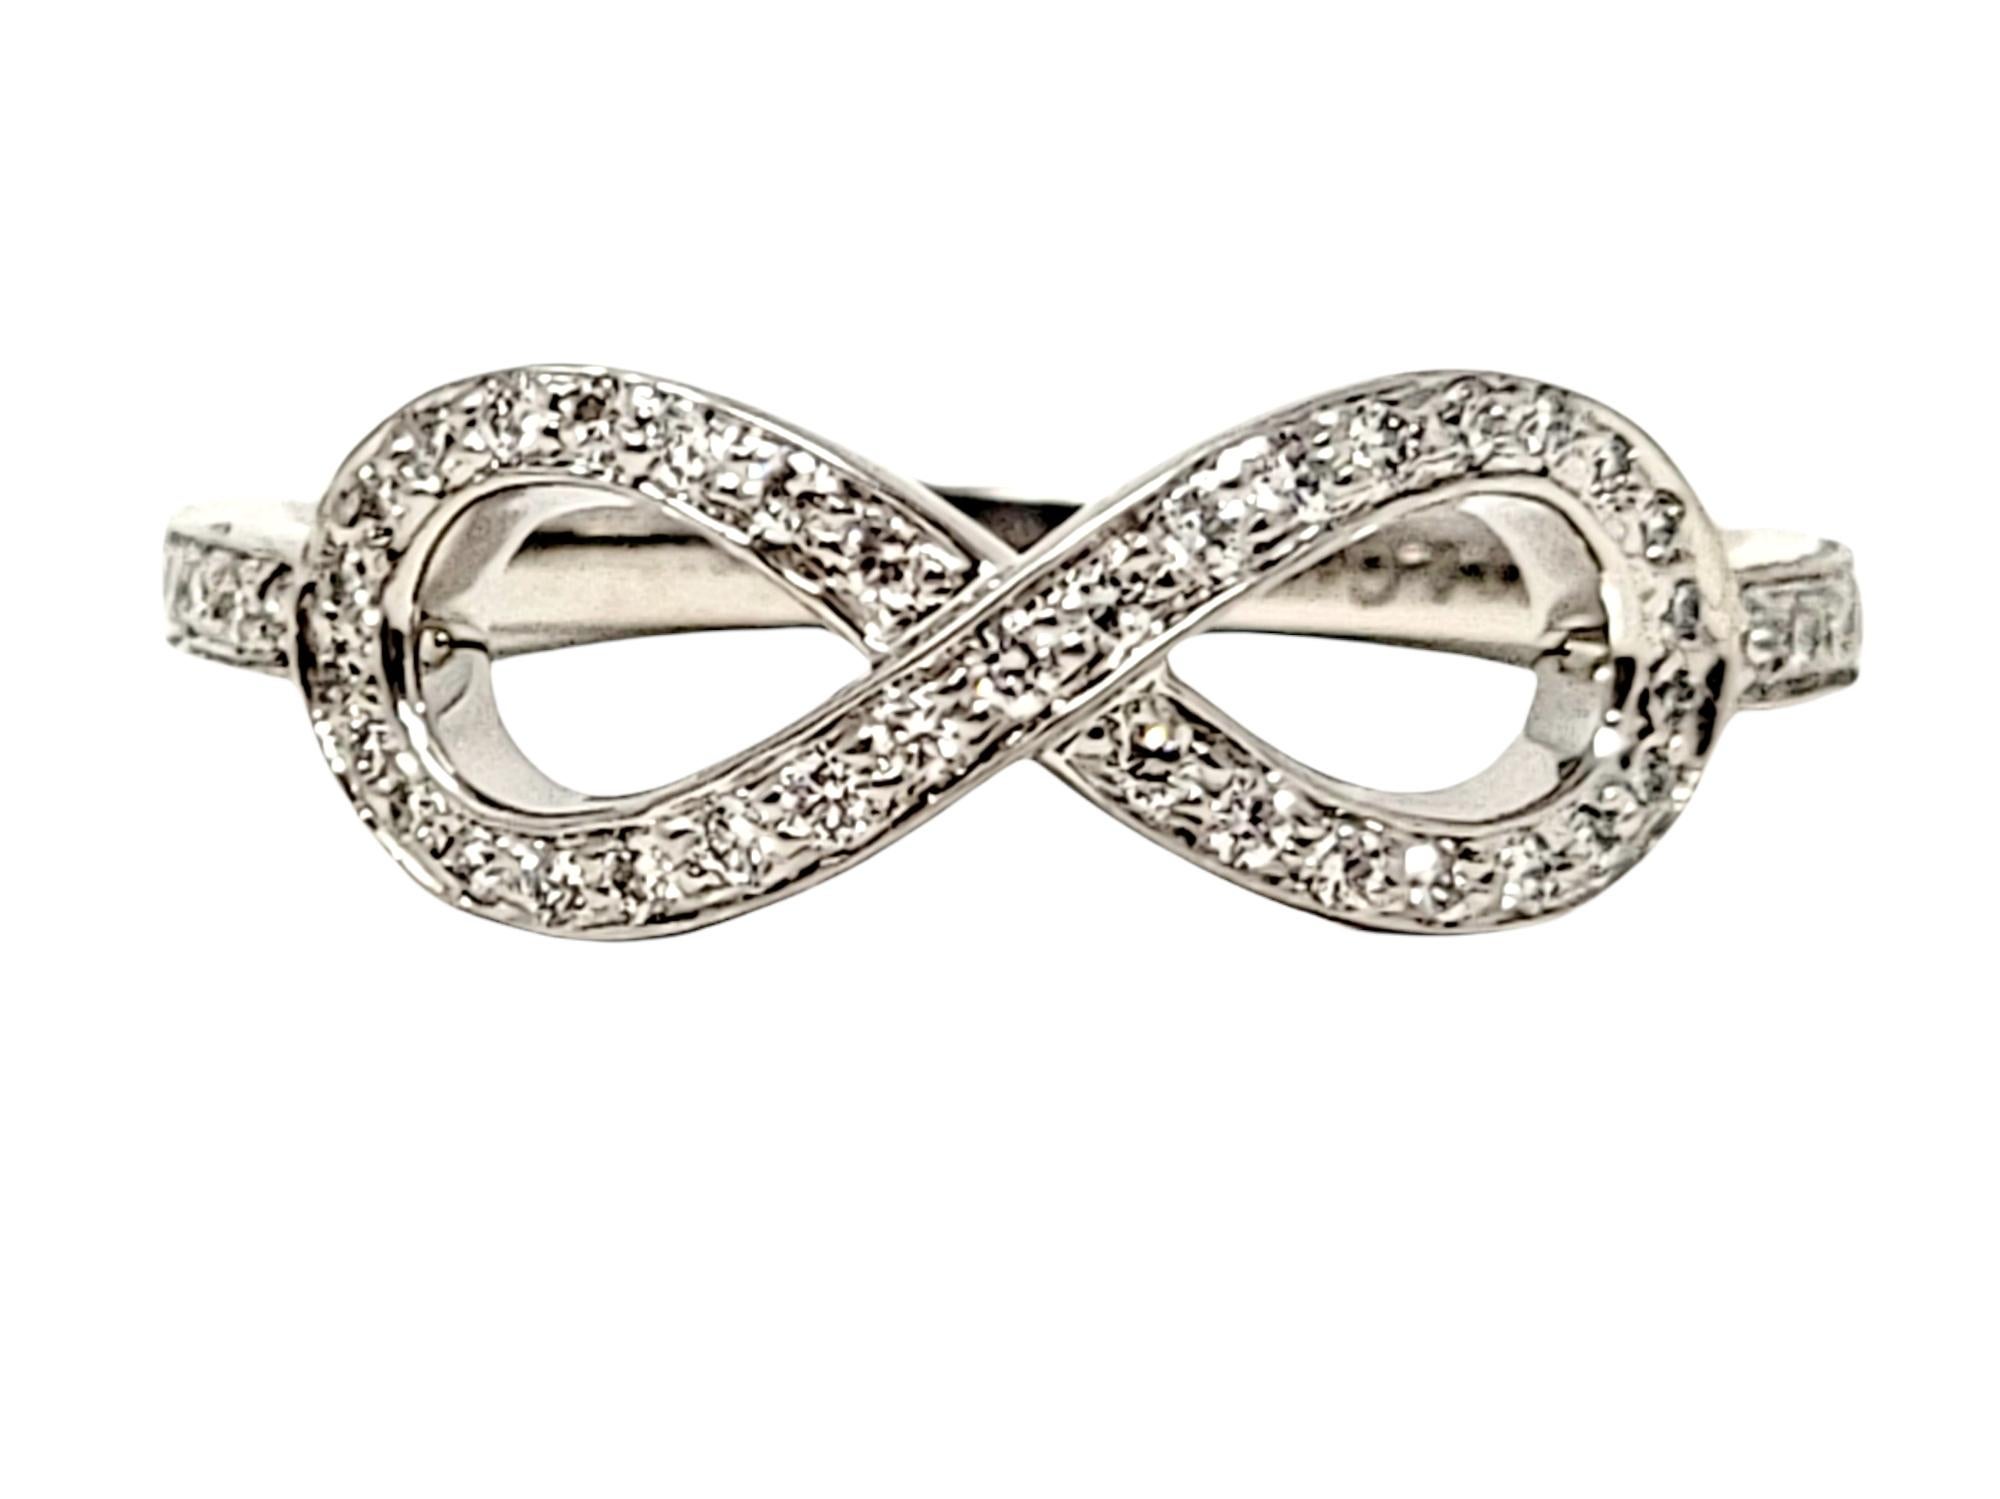 Ring size: 5.25

This lovely and delicate Tiffany Infinity ring will stand the test of time. The timeless design features a single infinity symbol arranged in a horizontal layout on a platinum band. The figure 8 shaped design is embellished with .14